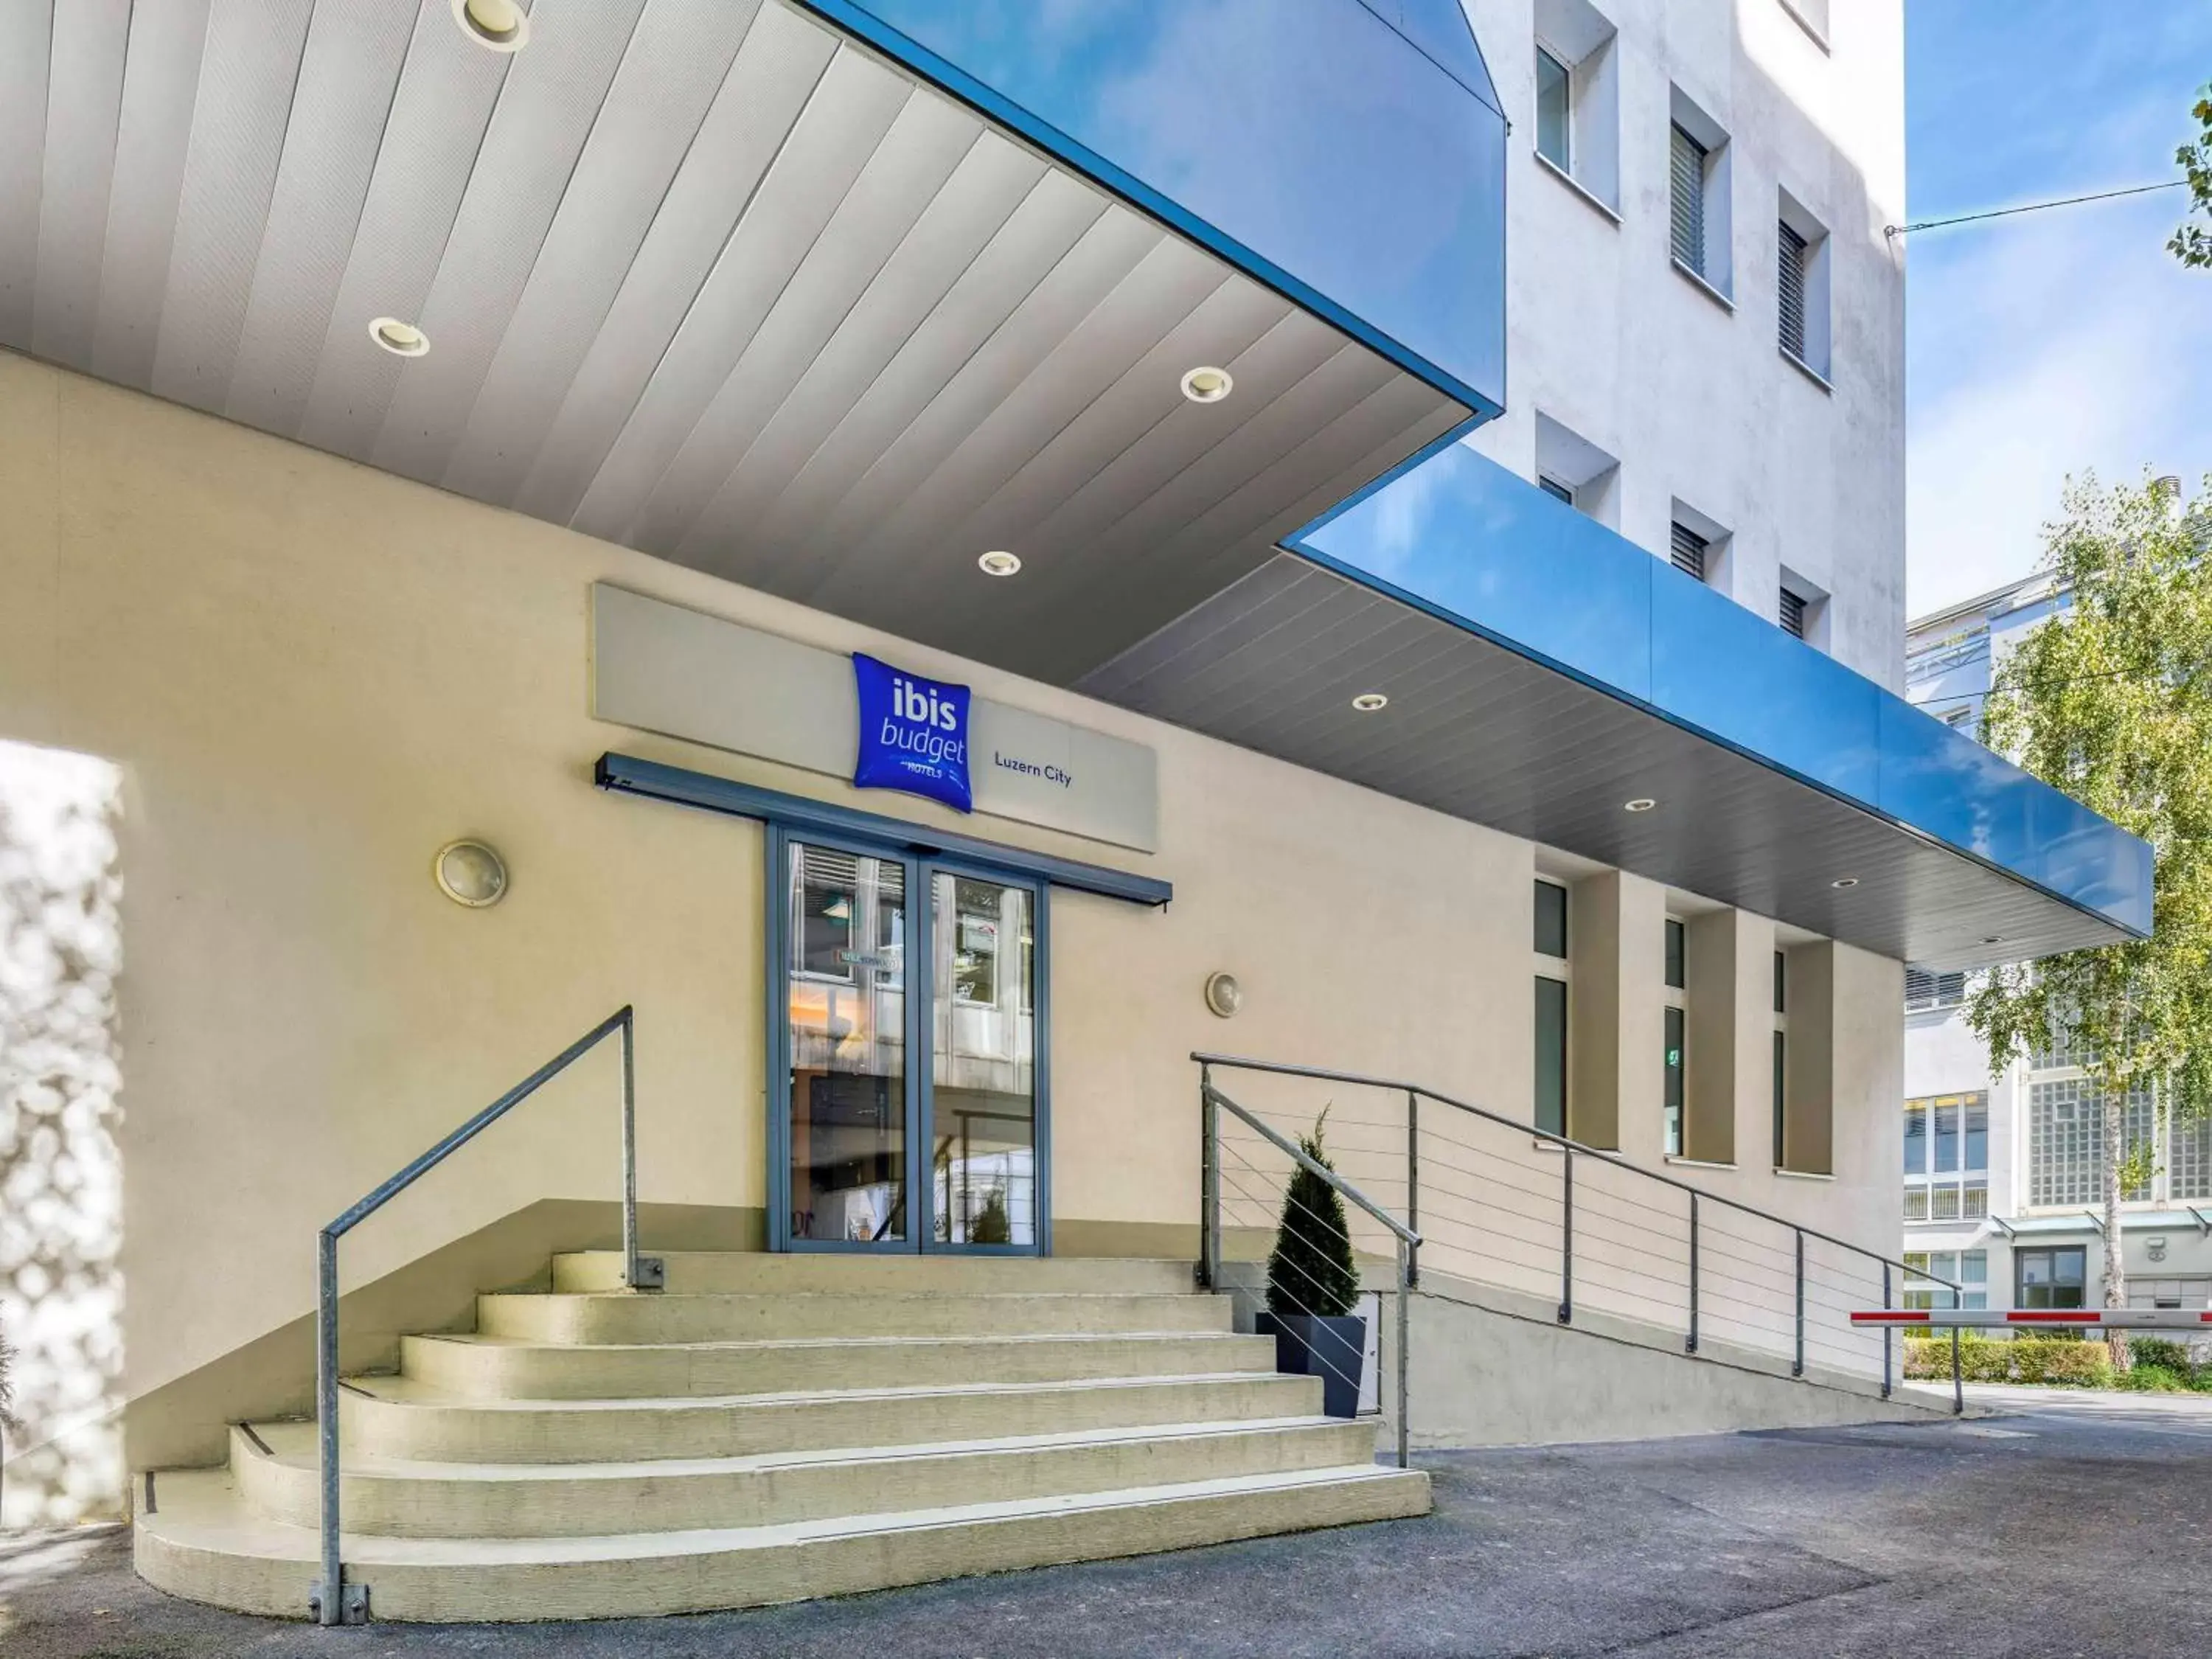 Property building in ibis budget Hotel Luzern City